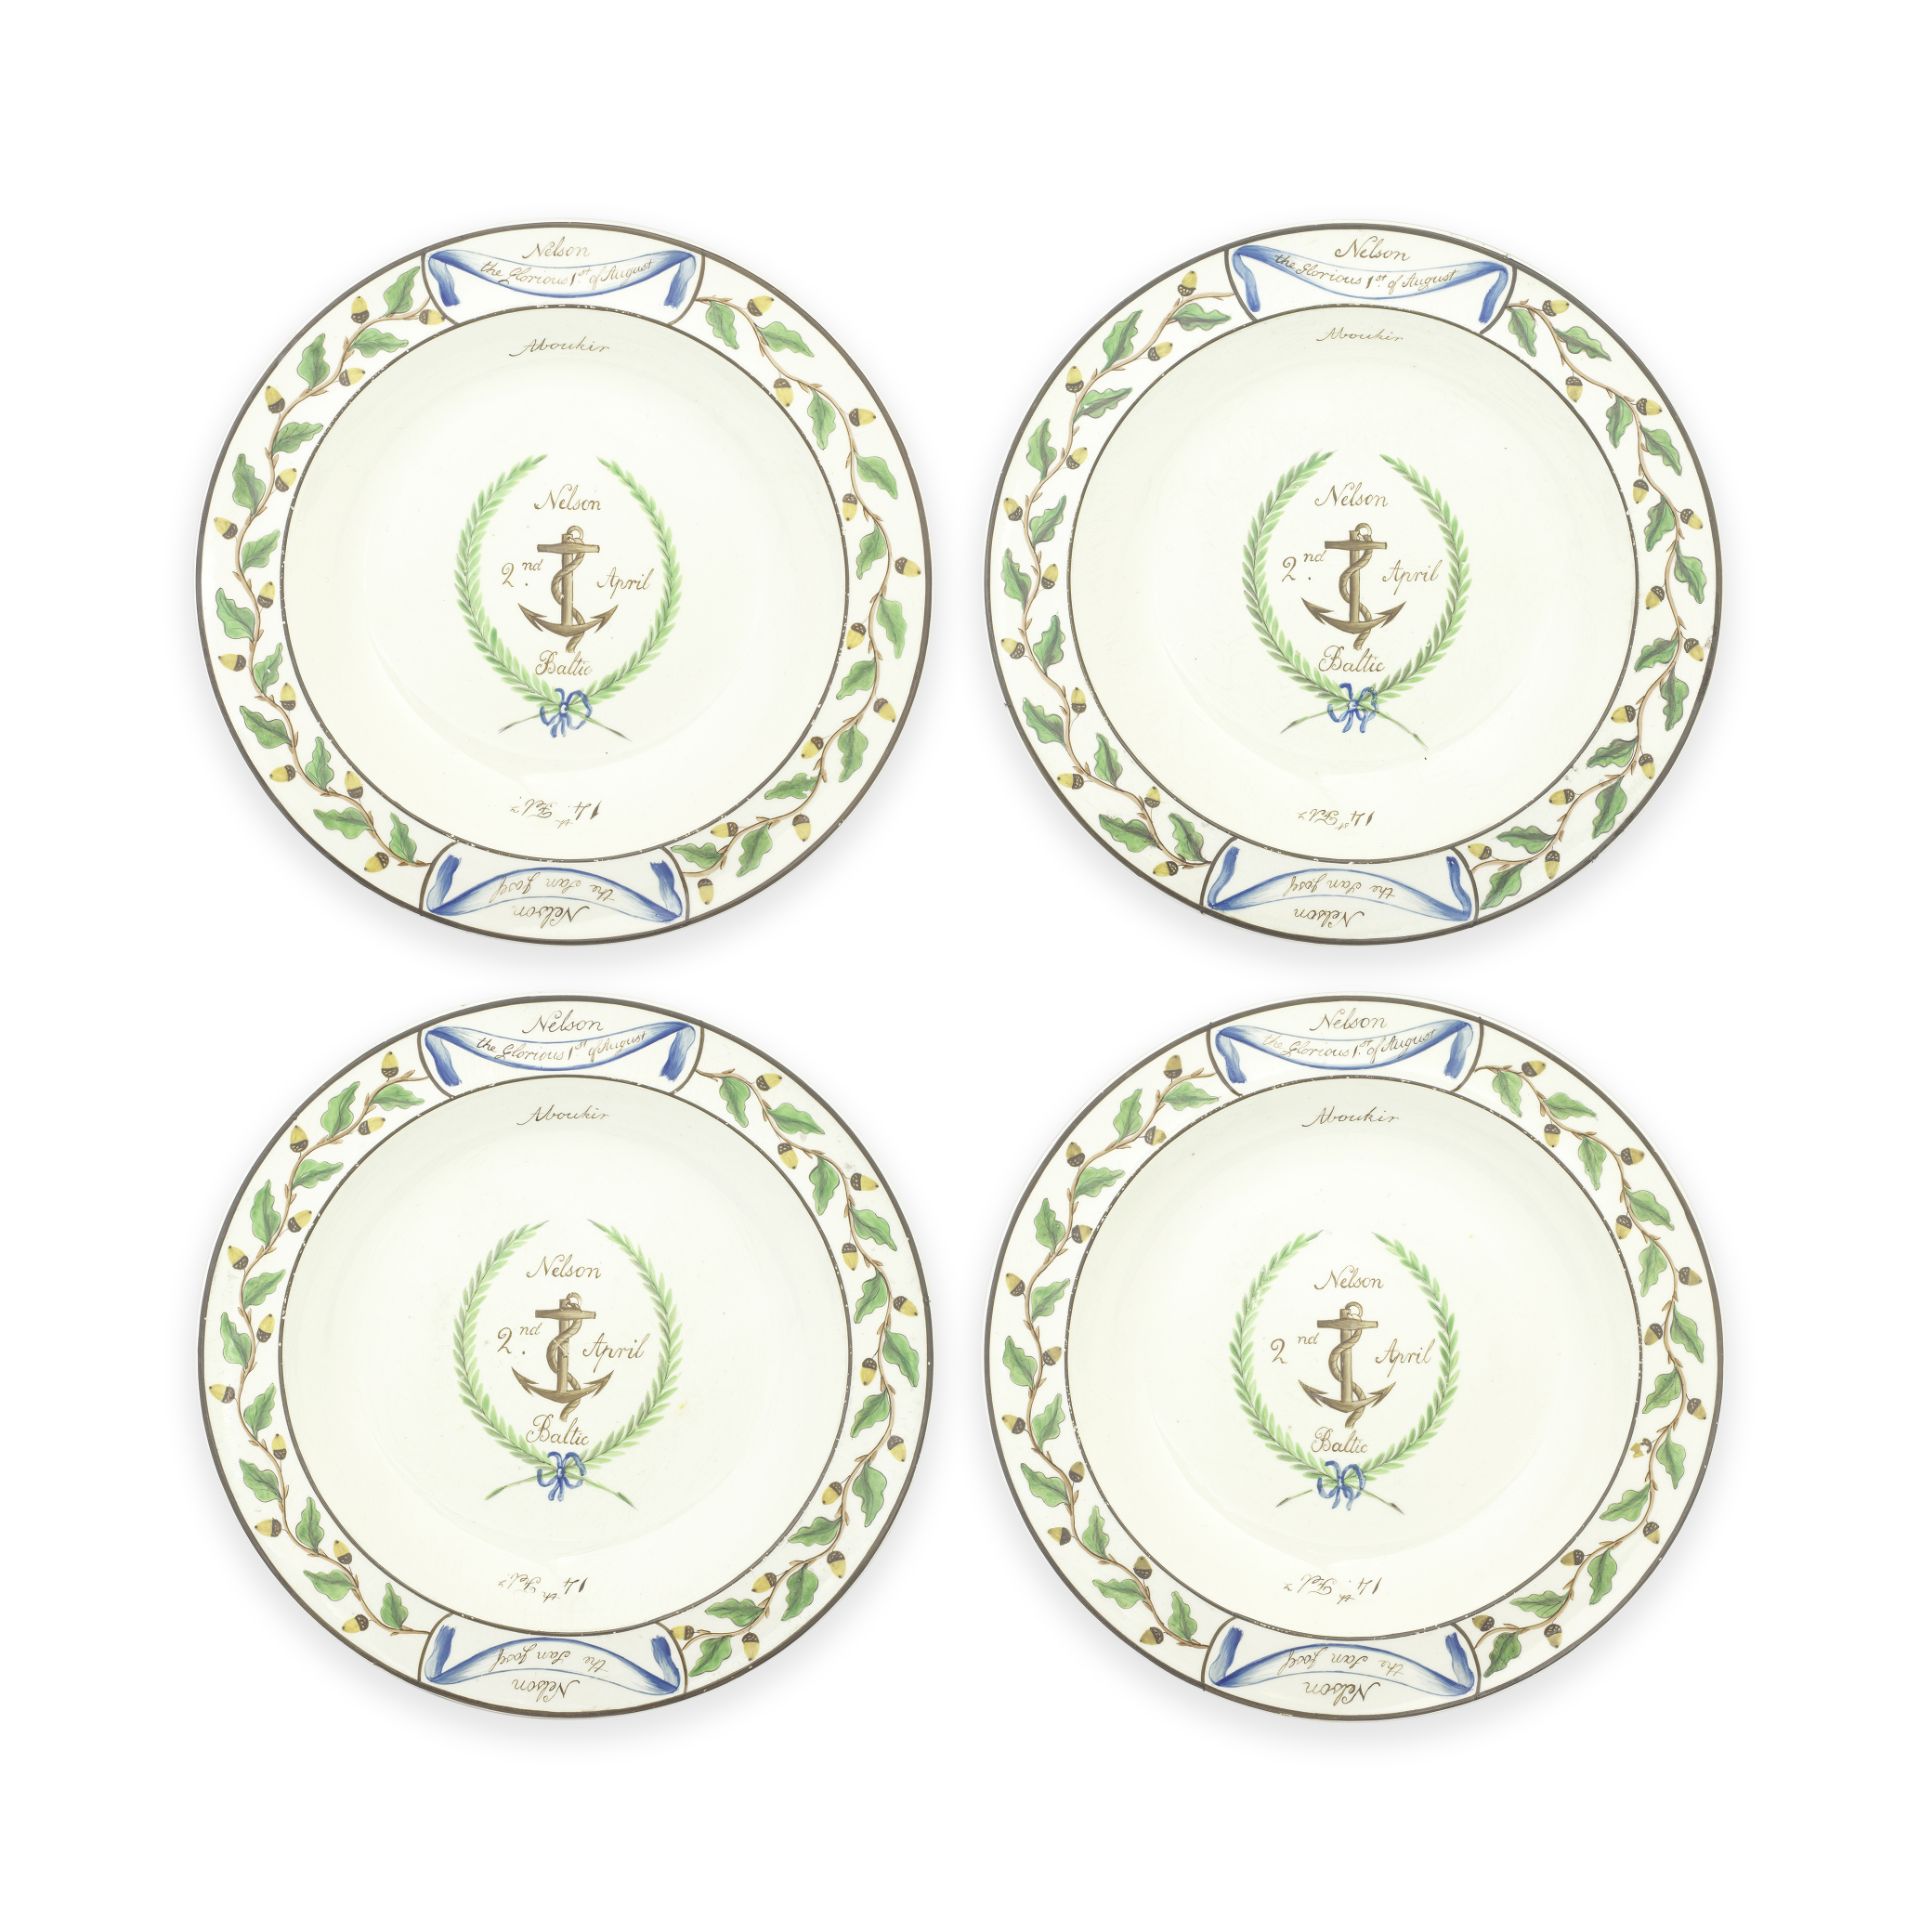 Four creamware soup plates from the 'Baltic Set Dinner Service', circa 1802